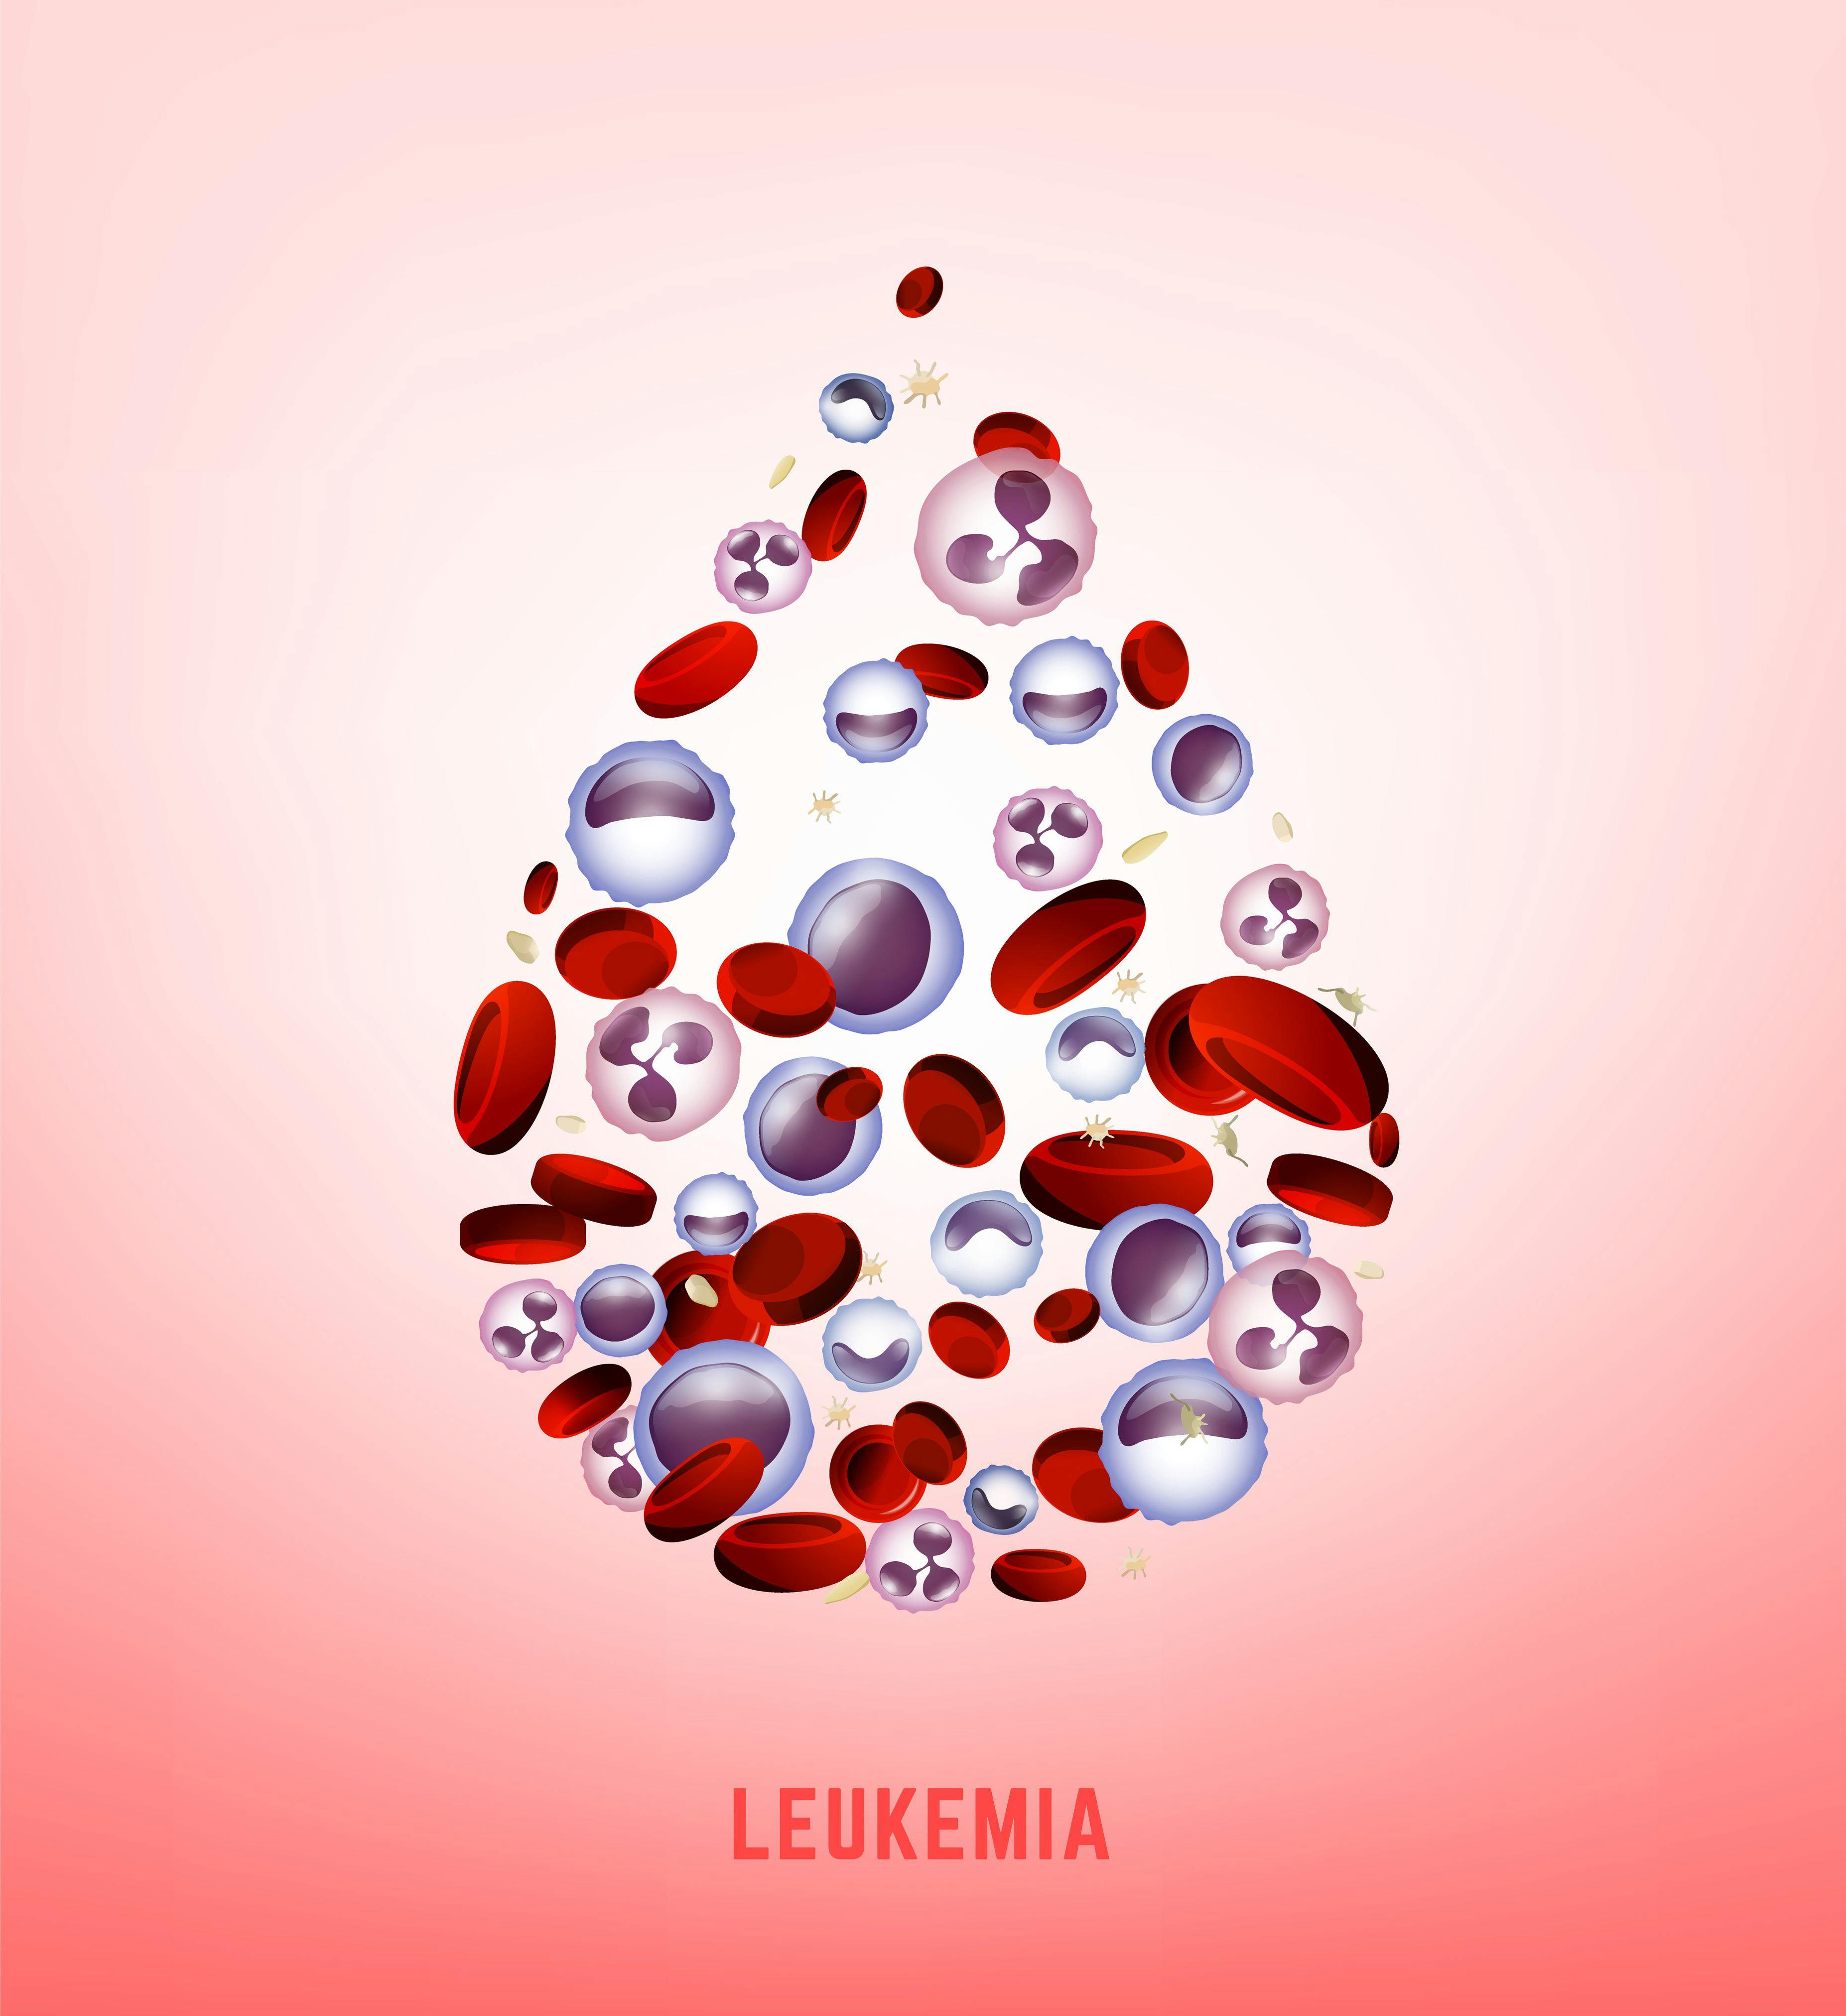 drop with blood cells and leukemia underneath | Image credit: © Double Brain stock.adobe.com